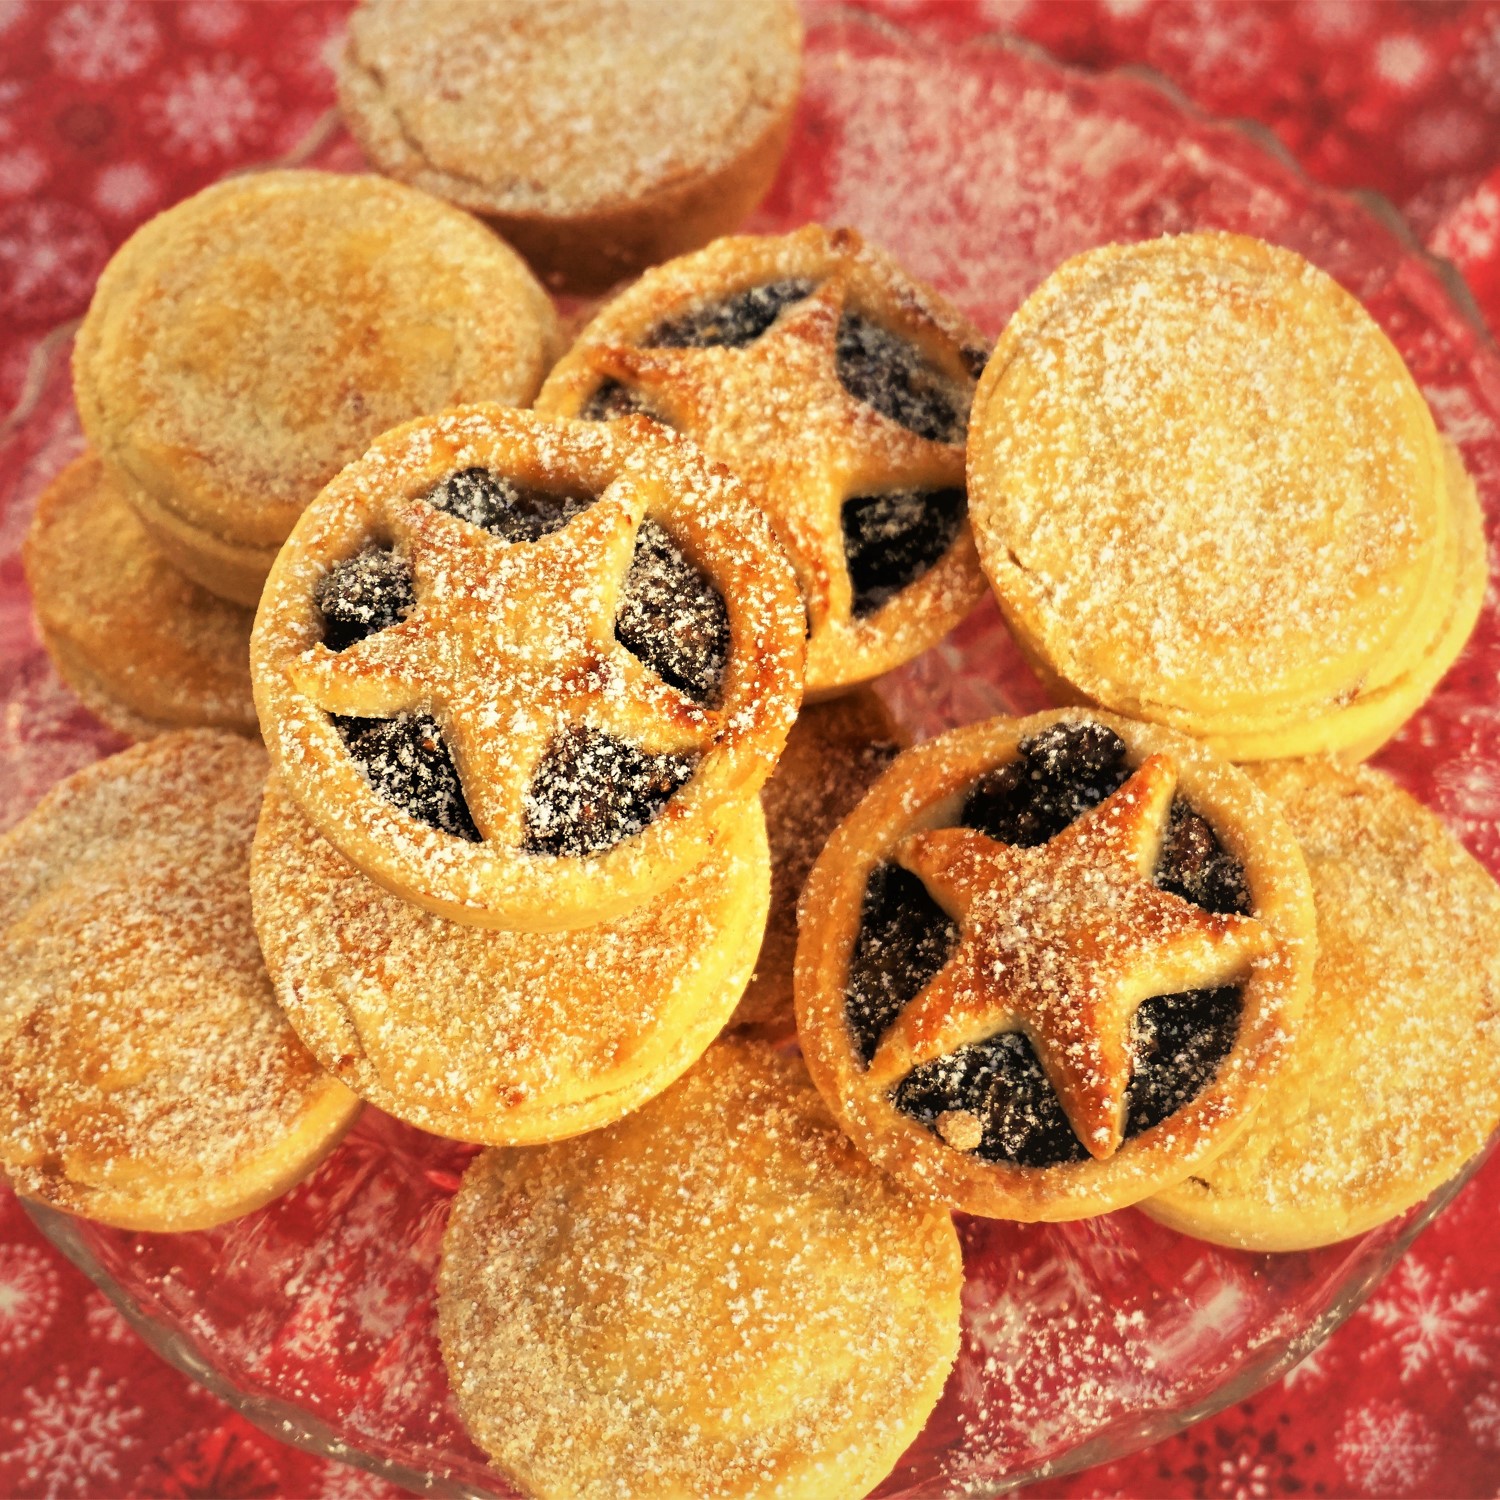 mince pies made with buttery & sweet shortcrust pastry